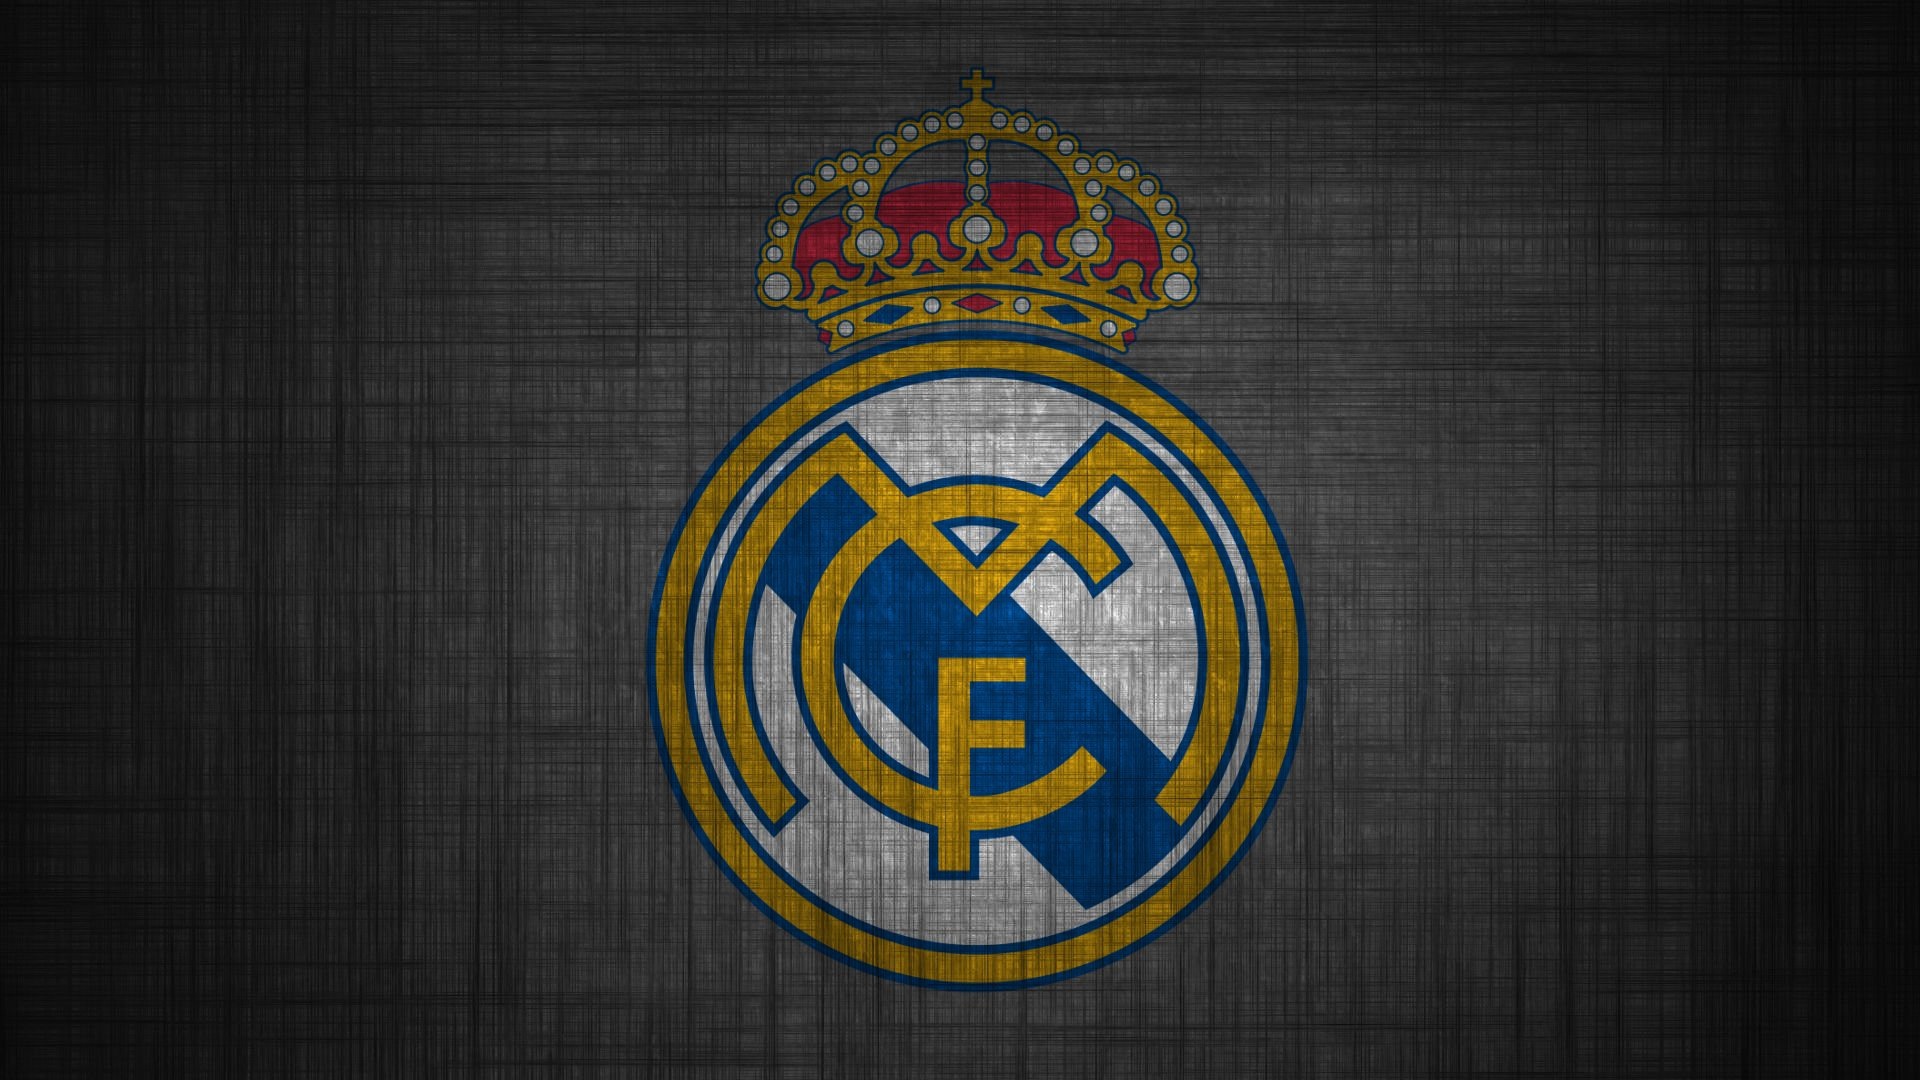 Free download FC Real Madrid Wallpaper Image Photo Picture Background [1920x1080] for your Desktop, Mobile & Tablet. Explore Real Madrid Fc Wallpaper. Real Madrid Fc Wallpaper, FC Barcelona Vs